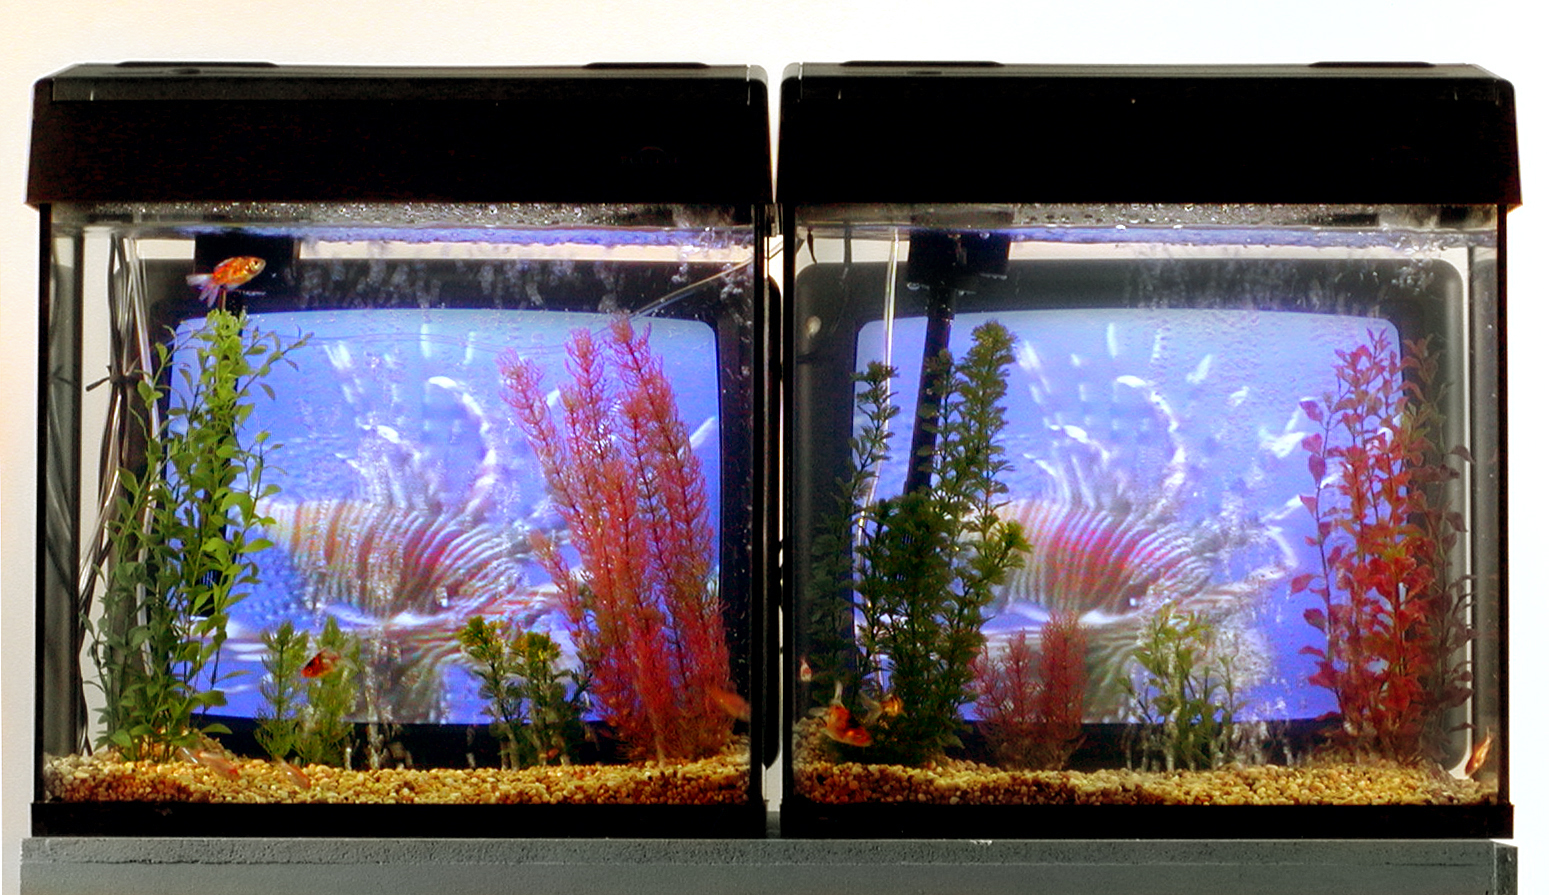 Nam June Paik often placed TVs in startling configurations or contexts, such as TV Fish, in which psychedelic video animations are displayed behind and through two fish aquariums, with live fish.